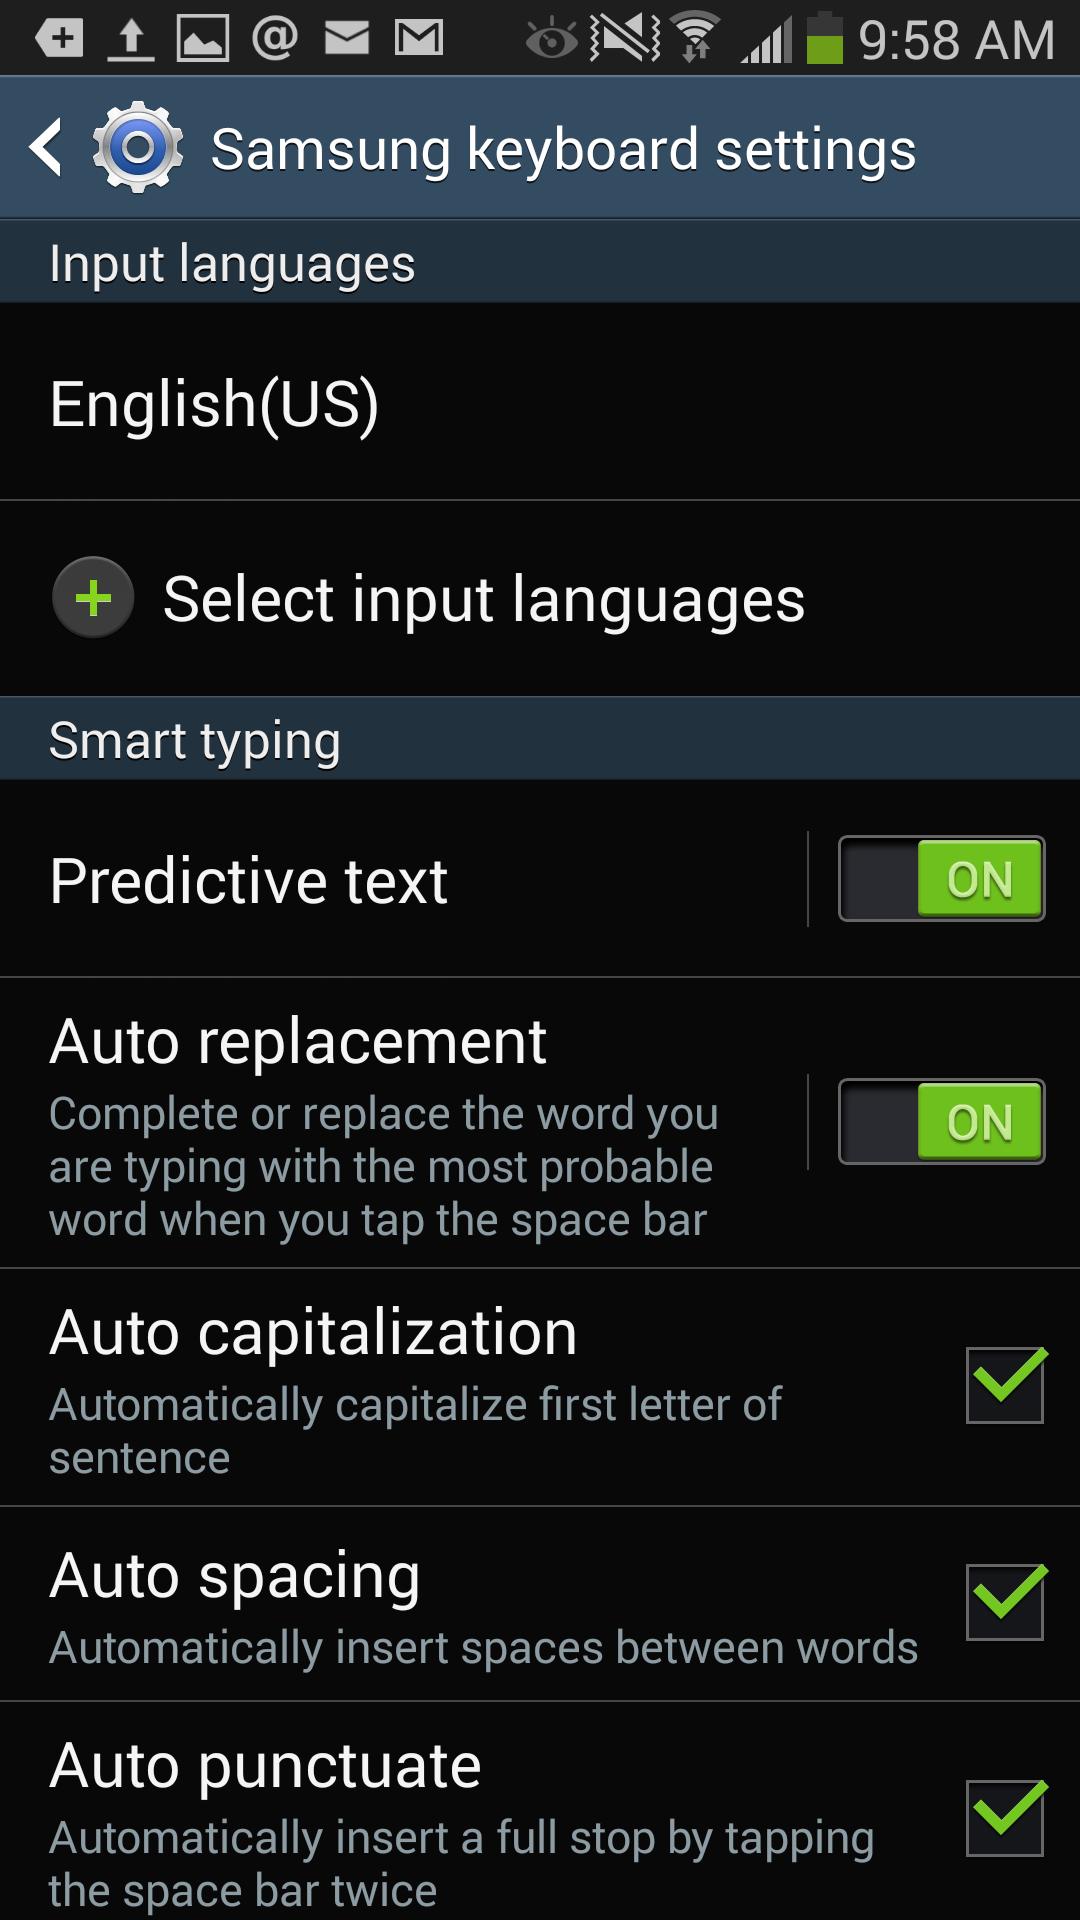 Pro tip: How to disable autocorrect on your Android keyboard